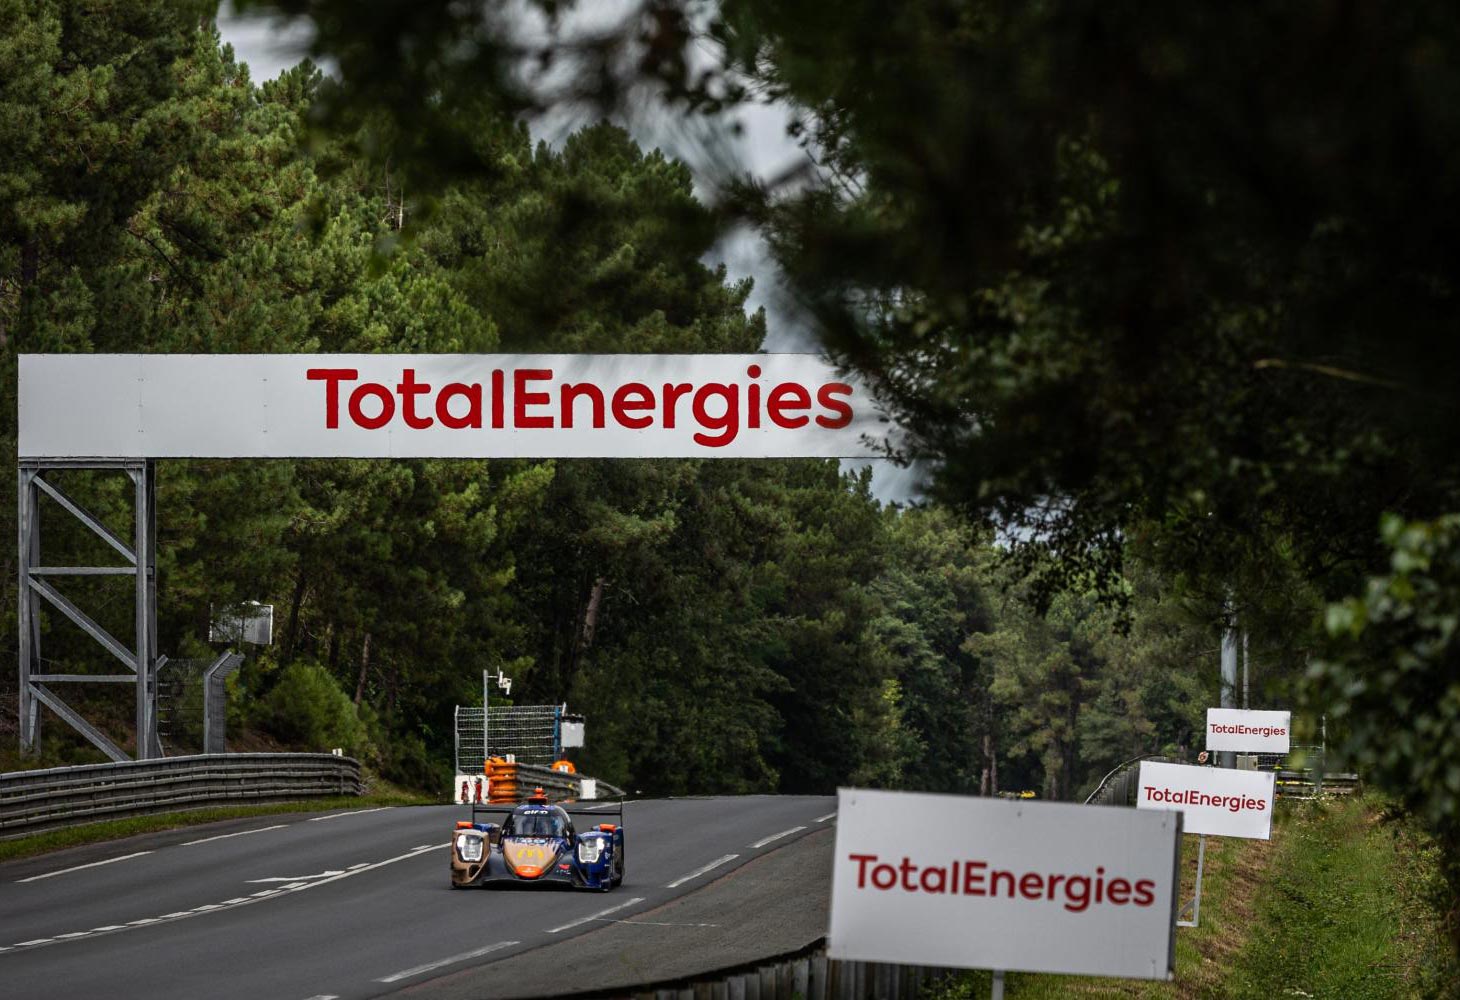 TotalEnergies developing a 100% renewable fuel for racing